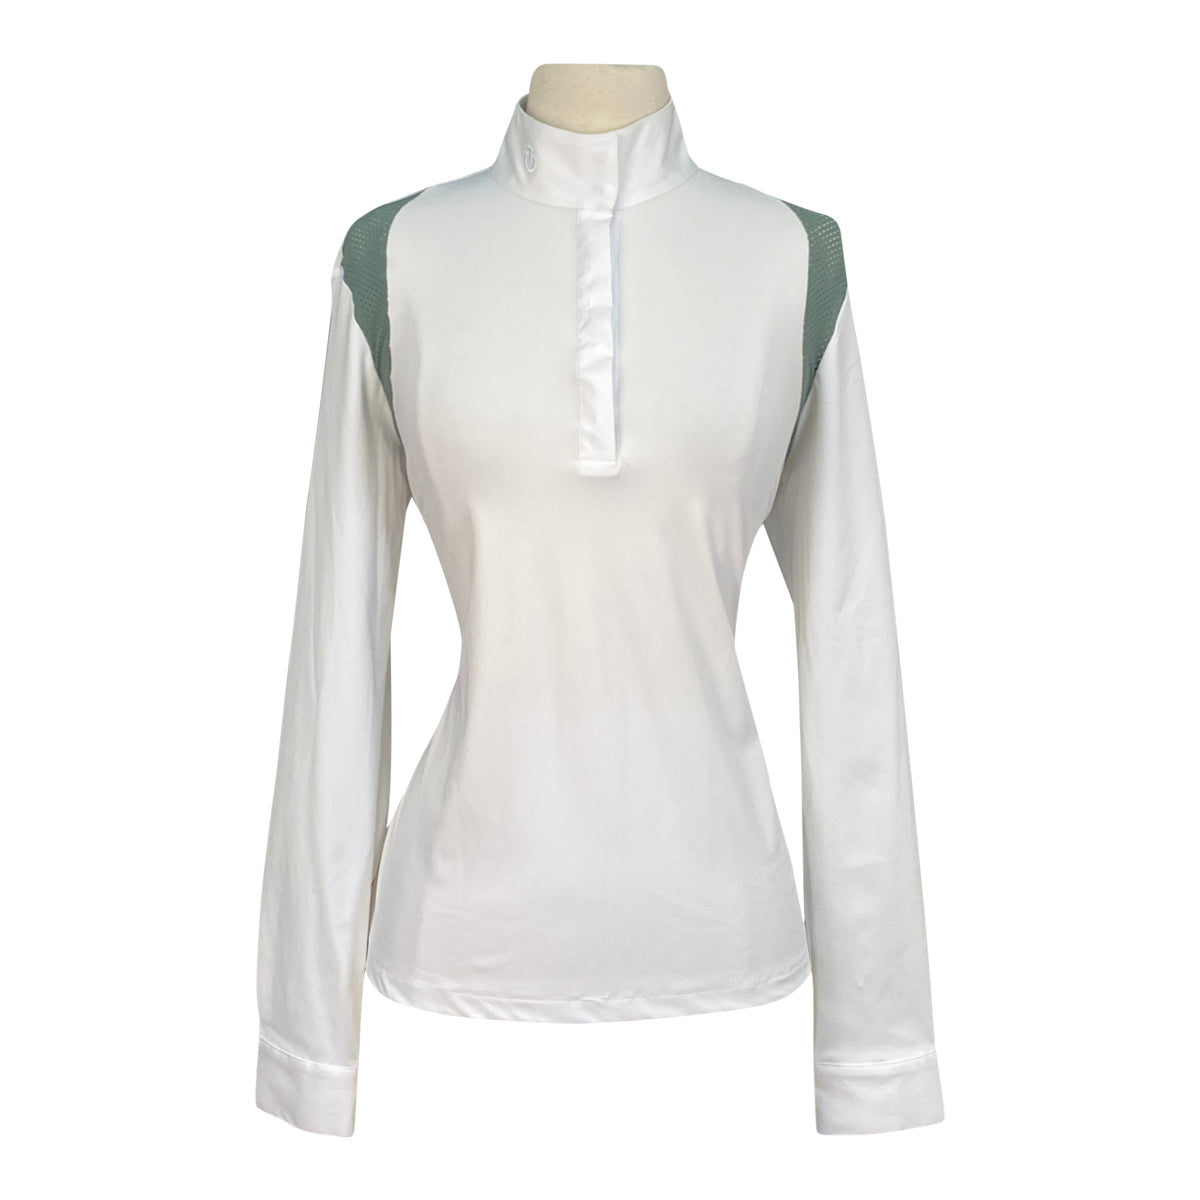 Cavalleria Toscana Jersey L/S Competition Shirt w/Perforated Shoulder Inserts in White w/Tan